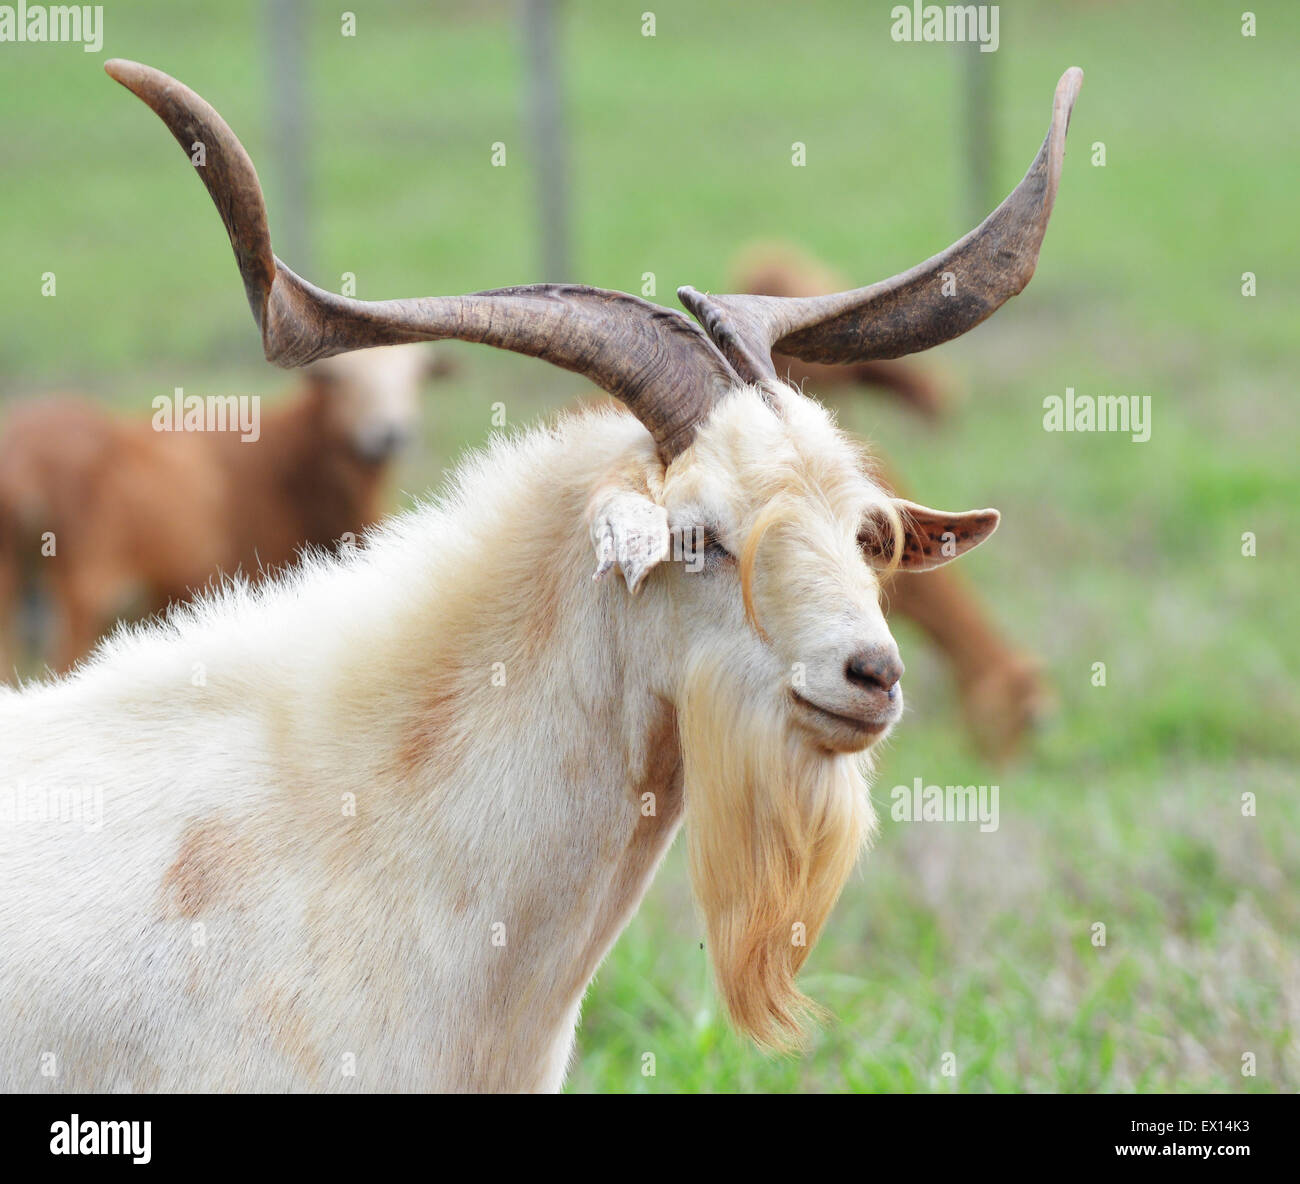 Close up of an old goat in a farm field Stock Photo